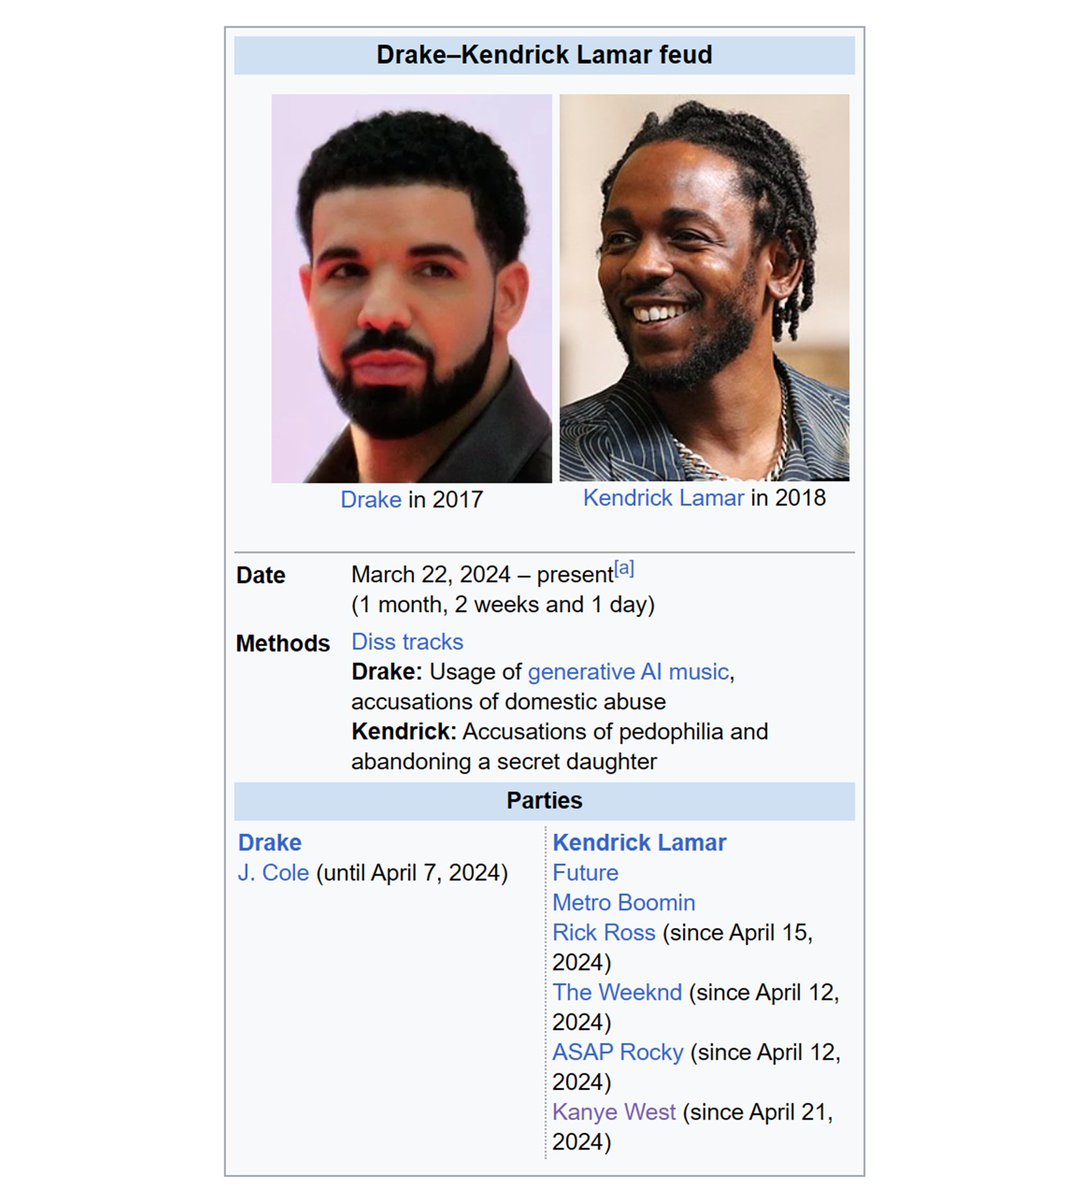 The Wikipedia page for the Drake/Kendrick Lamar beef is formatted like it's a war between two countries 💀